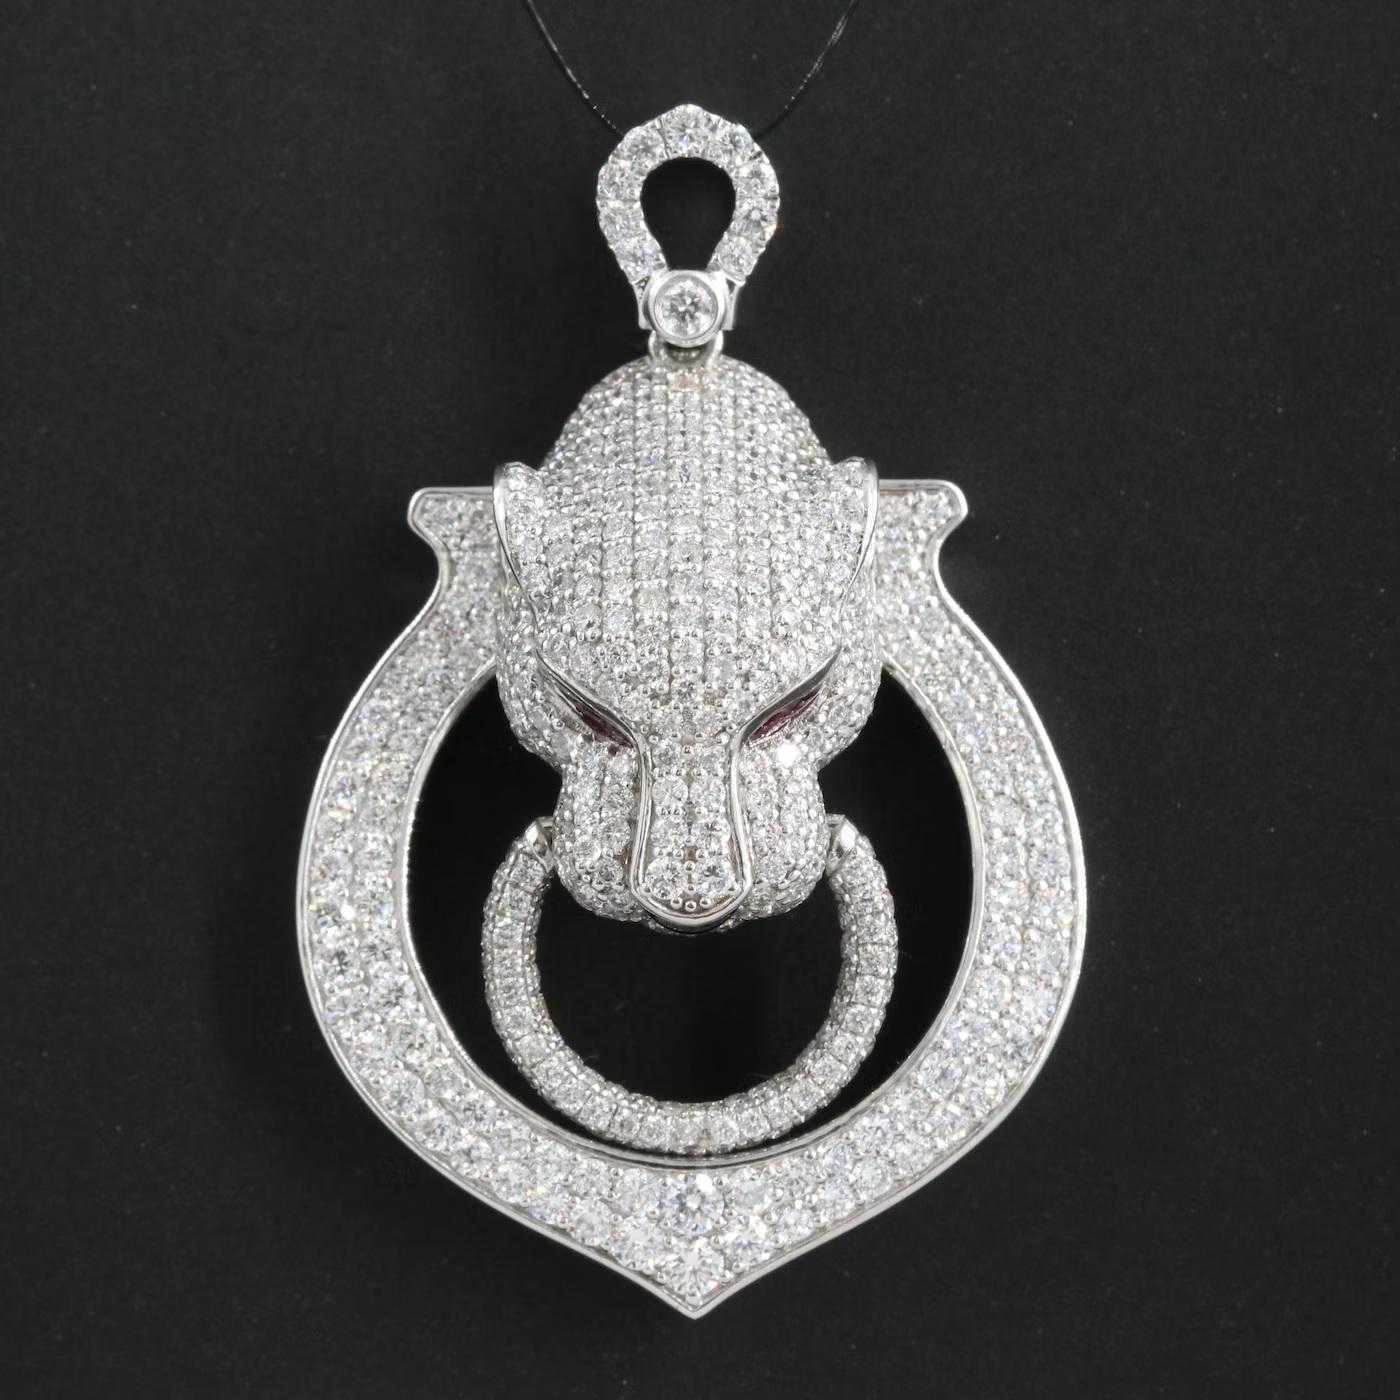 Designer Oversized statement 3D Pendant

Panther Panthere design, fancy 3D

NEW with tags, Tag price $22500

Platinum 950, stamped Pt950

Heavy and well made, 16.5 grams in weight 

4.55 CT Diamond & Ruby (Ruby Eyes)

No chain is included

Comes